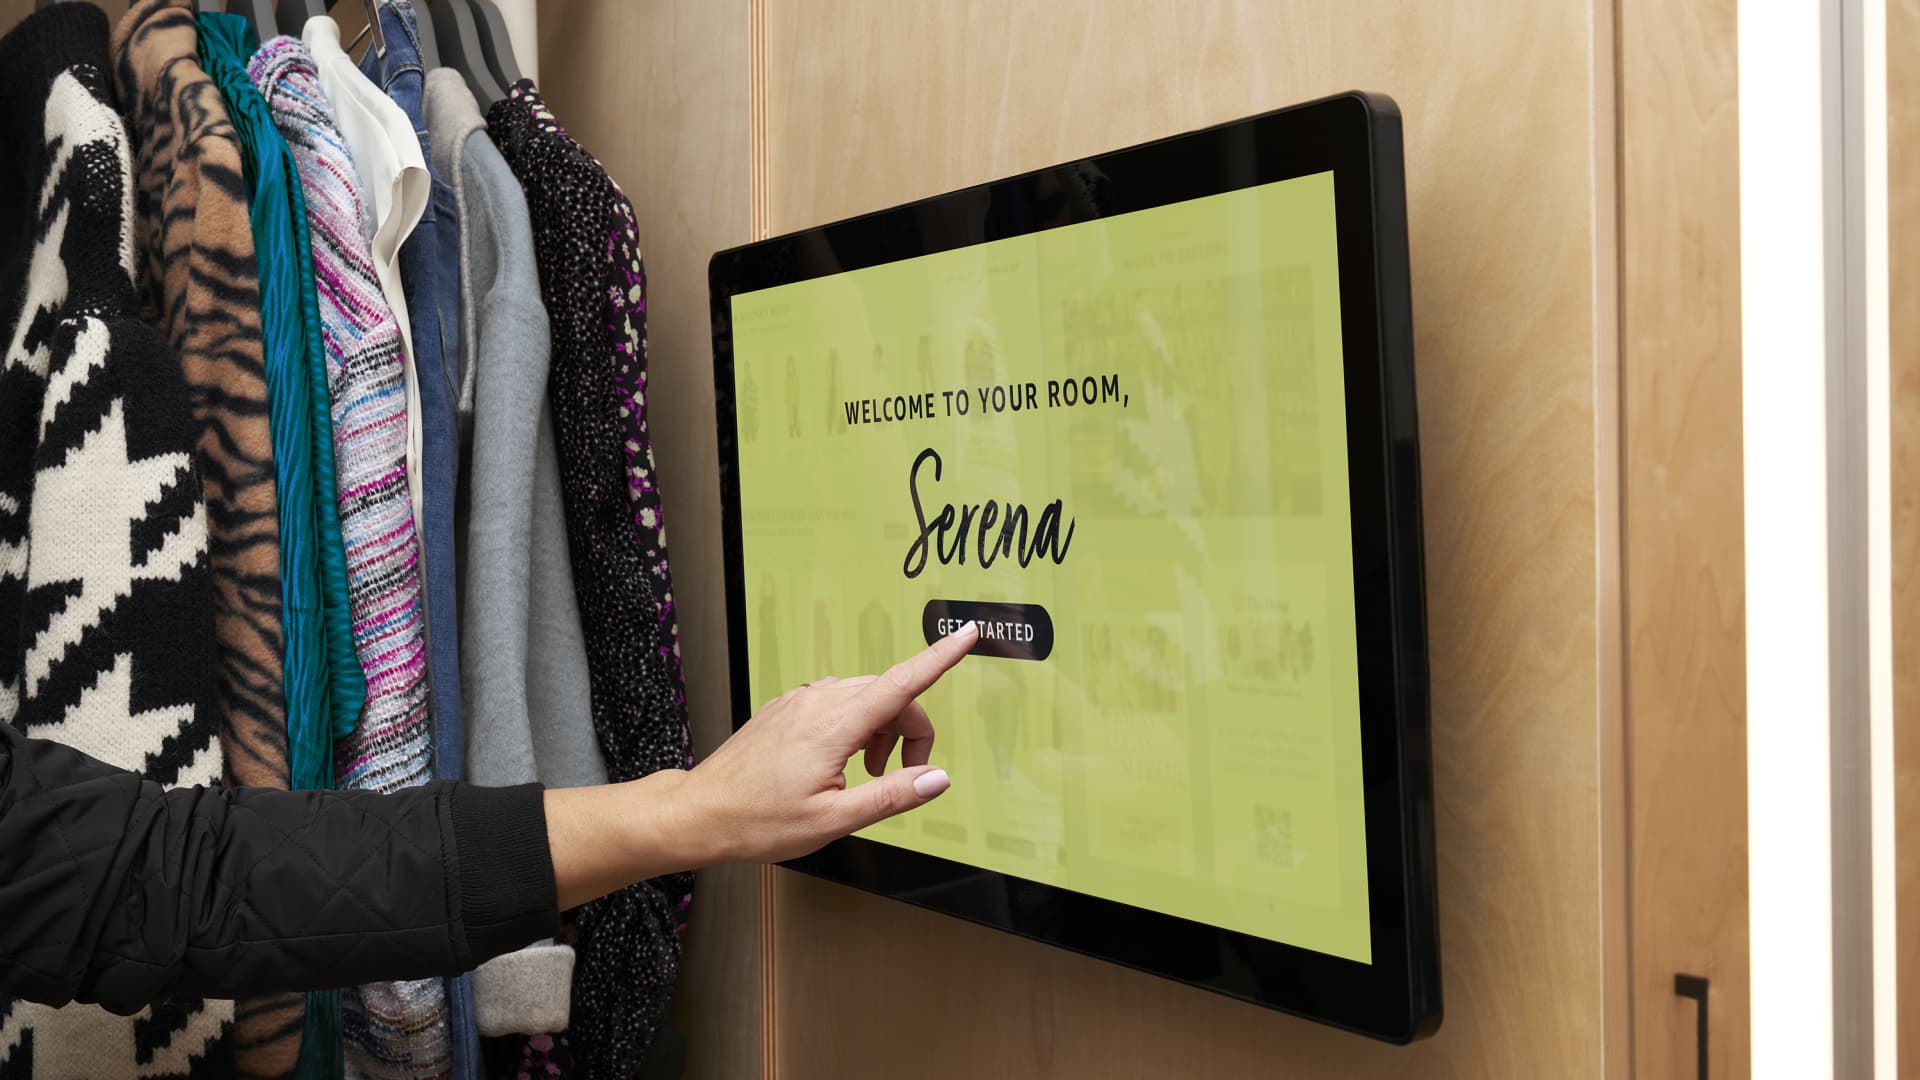 In the fitting rooms, Amazon has added touchscreen displays, which shoppers can use to rate items or request different styles or sizes to be delivered to their fitting room.